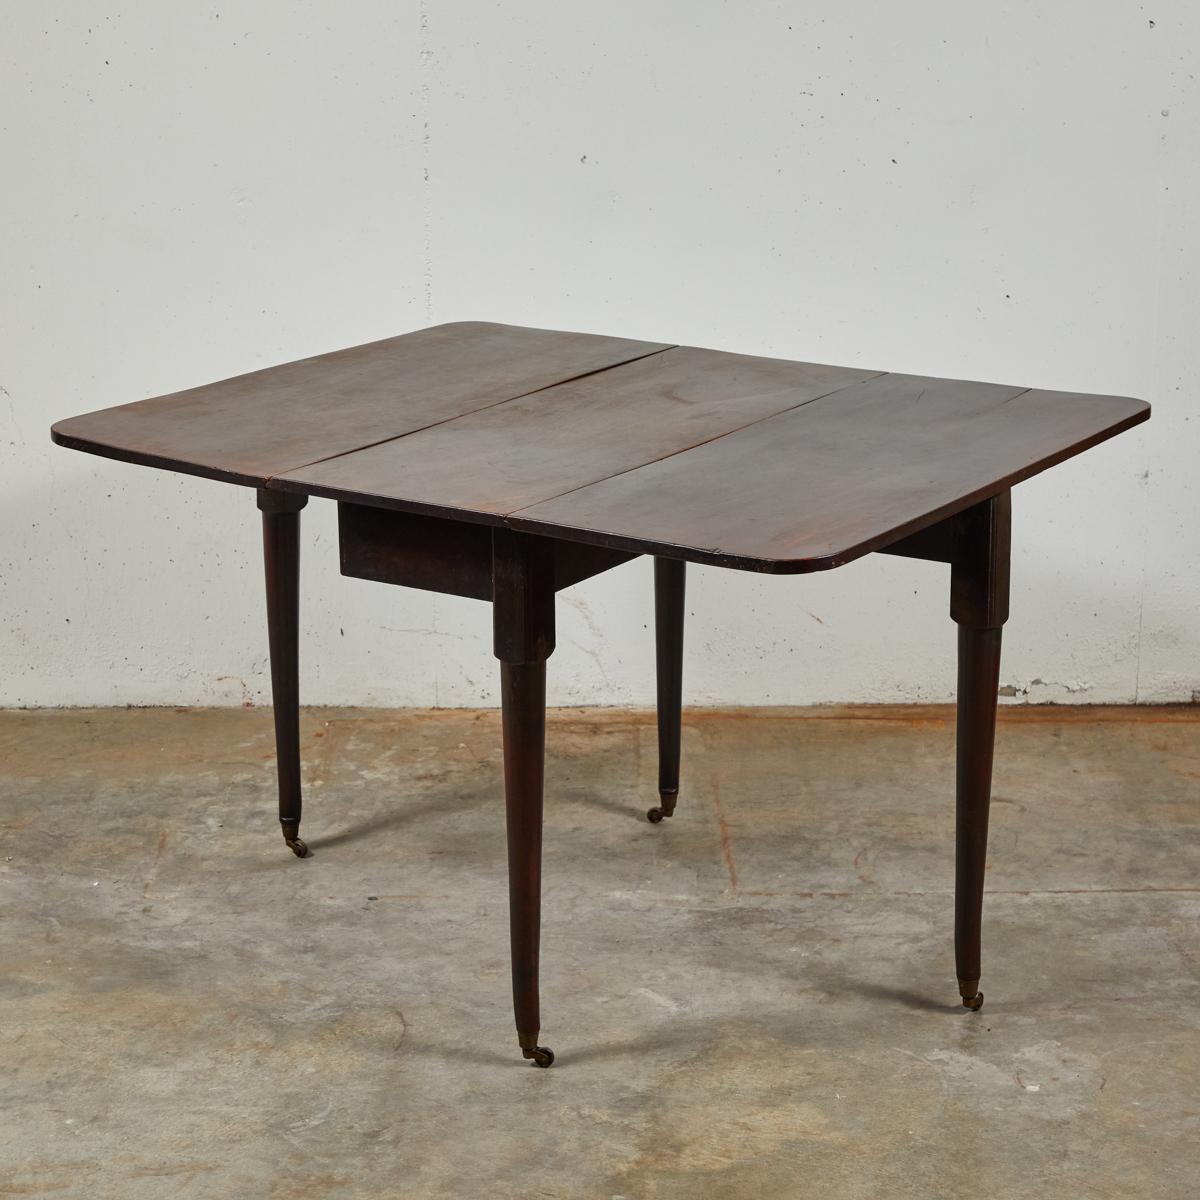 English 18th Century Plum Pudding Mahogany Drop-Leaf Dining or Side Table from England